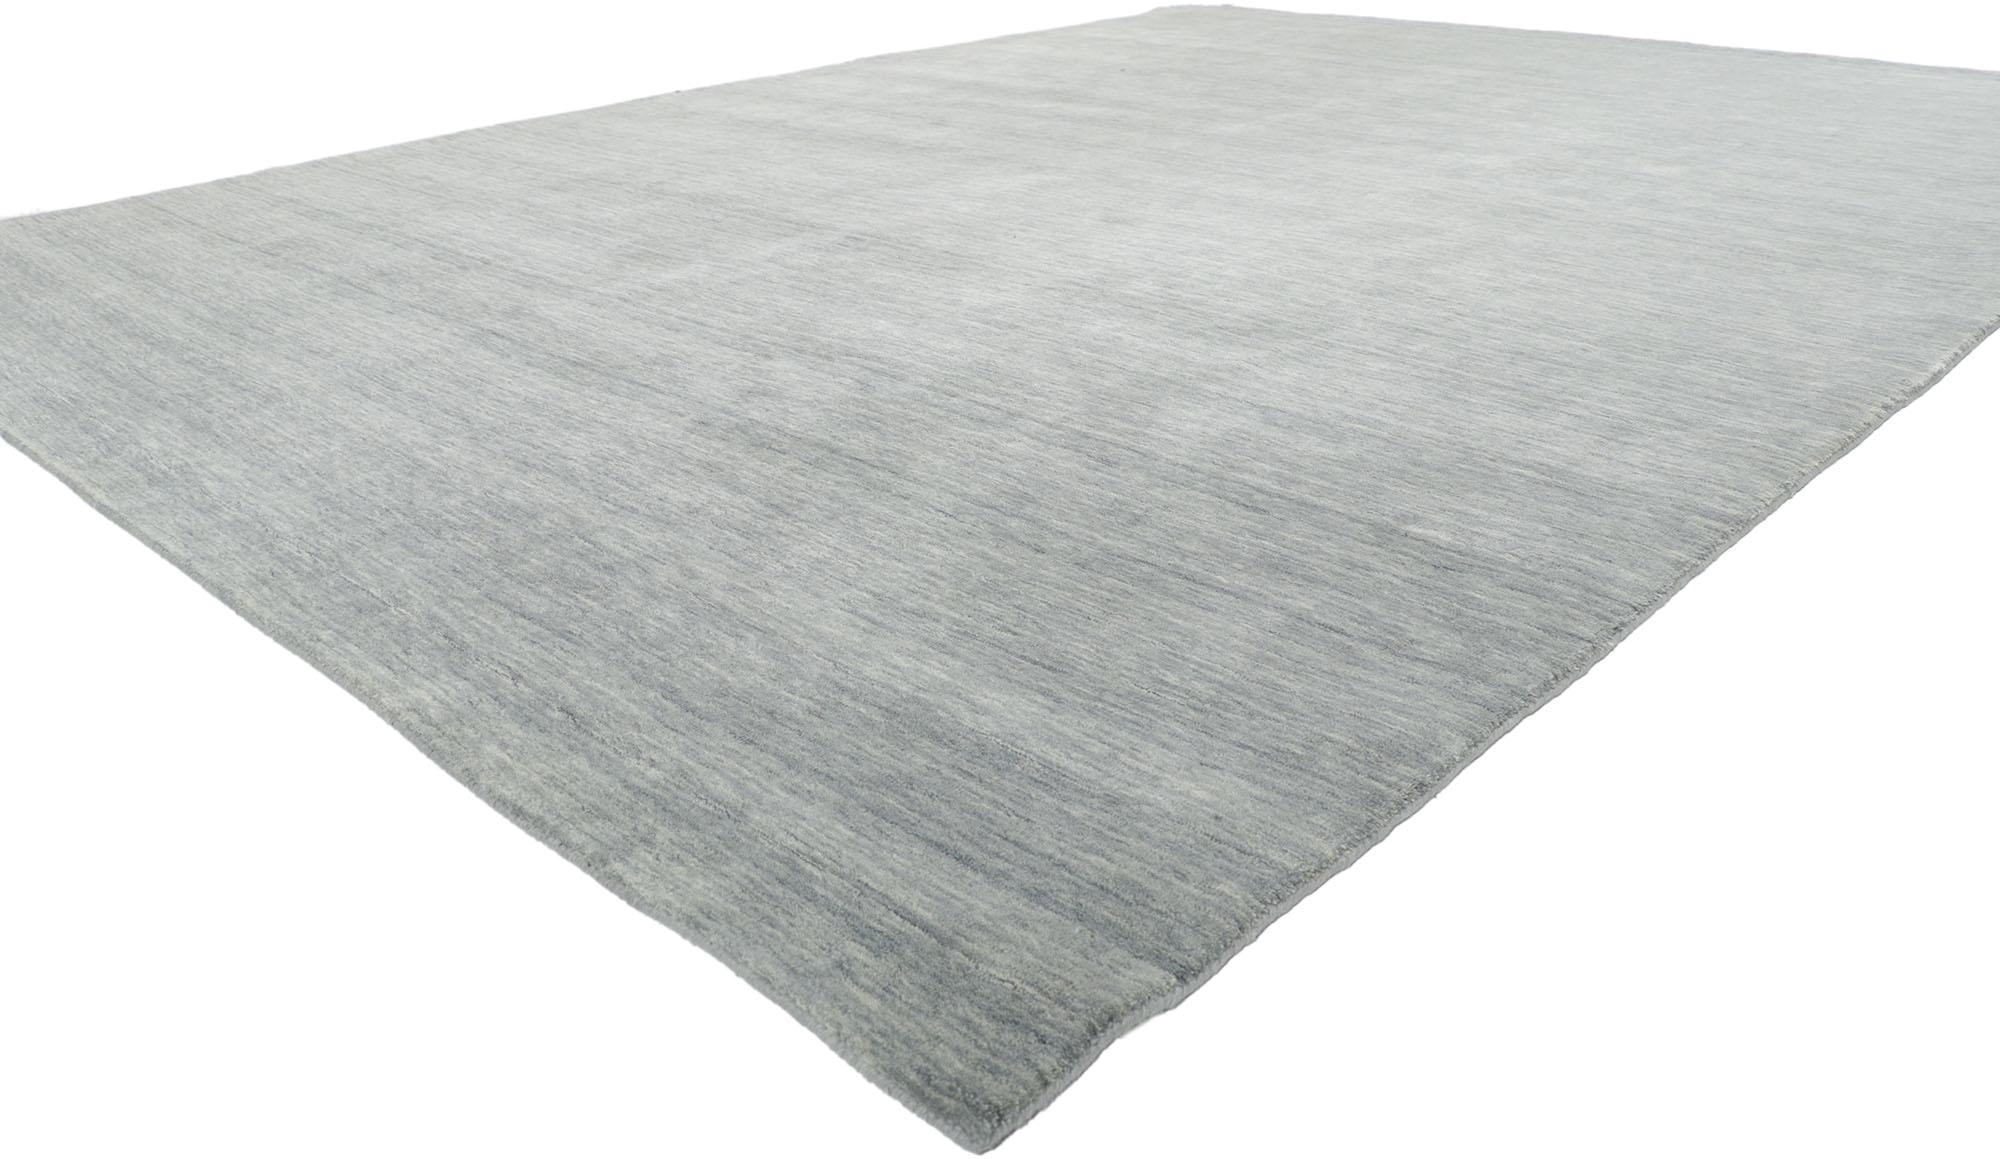 30742 New Contemporary Gray Area Rug with Modern Style 09'00 x 11'11. Effortless beauty combined with simplicity and modern style, this hand-loom wool contemporary Indian rug provides a feeling of cozy contentment without the clutter. Imbued with